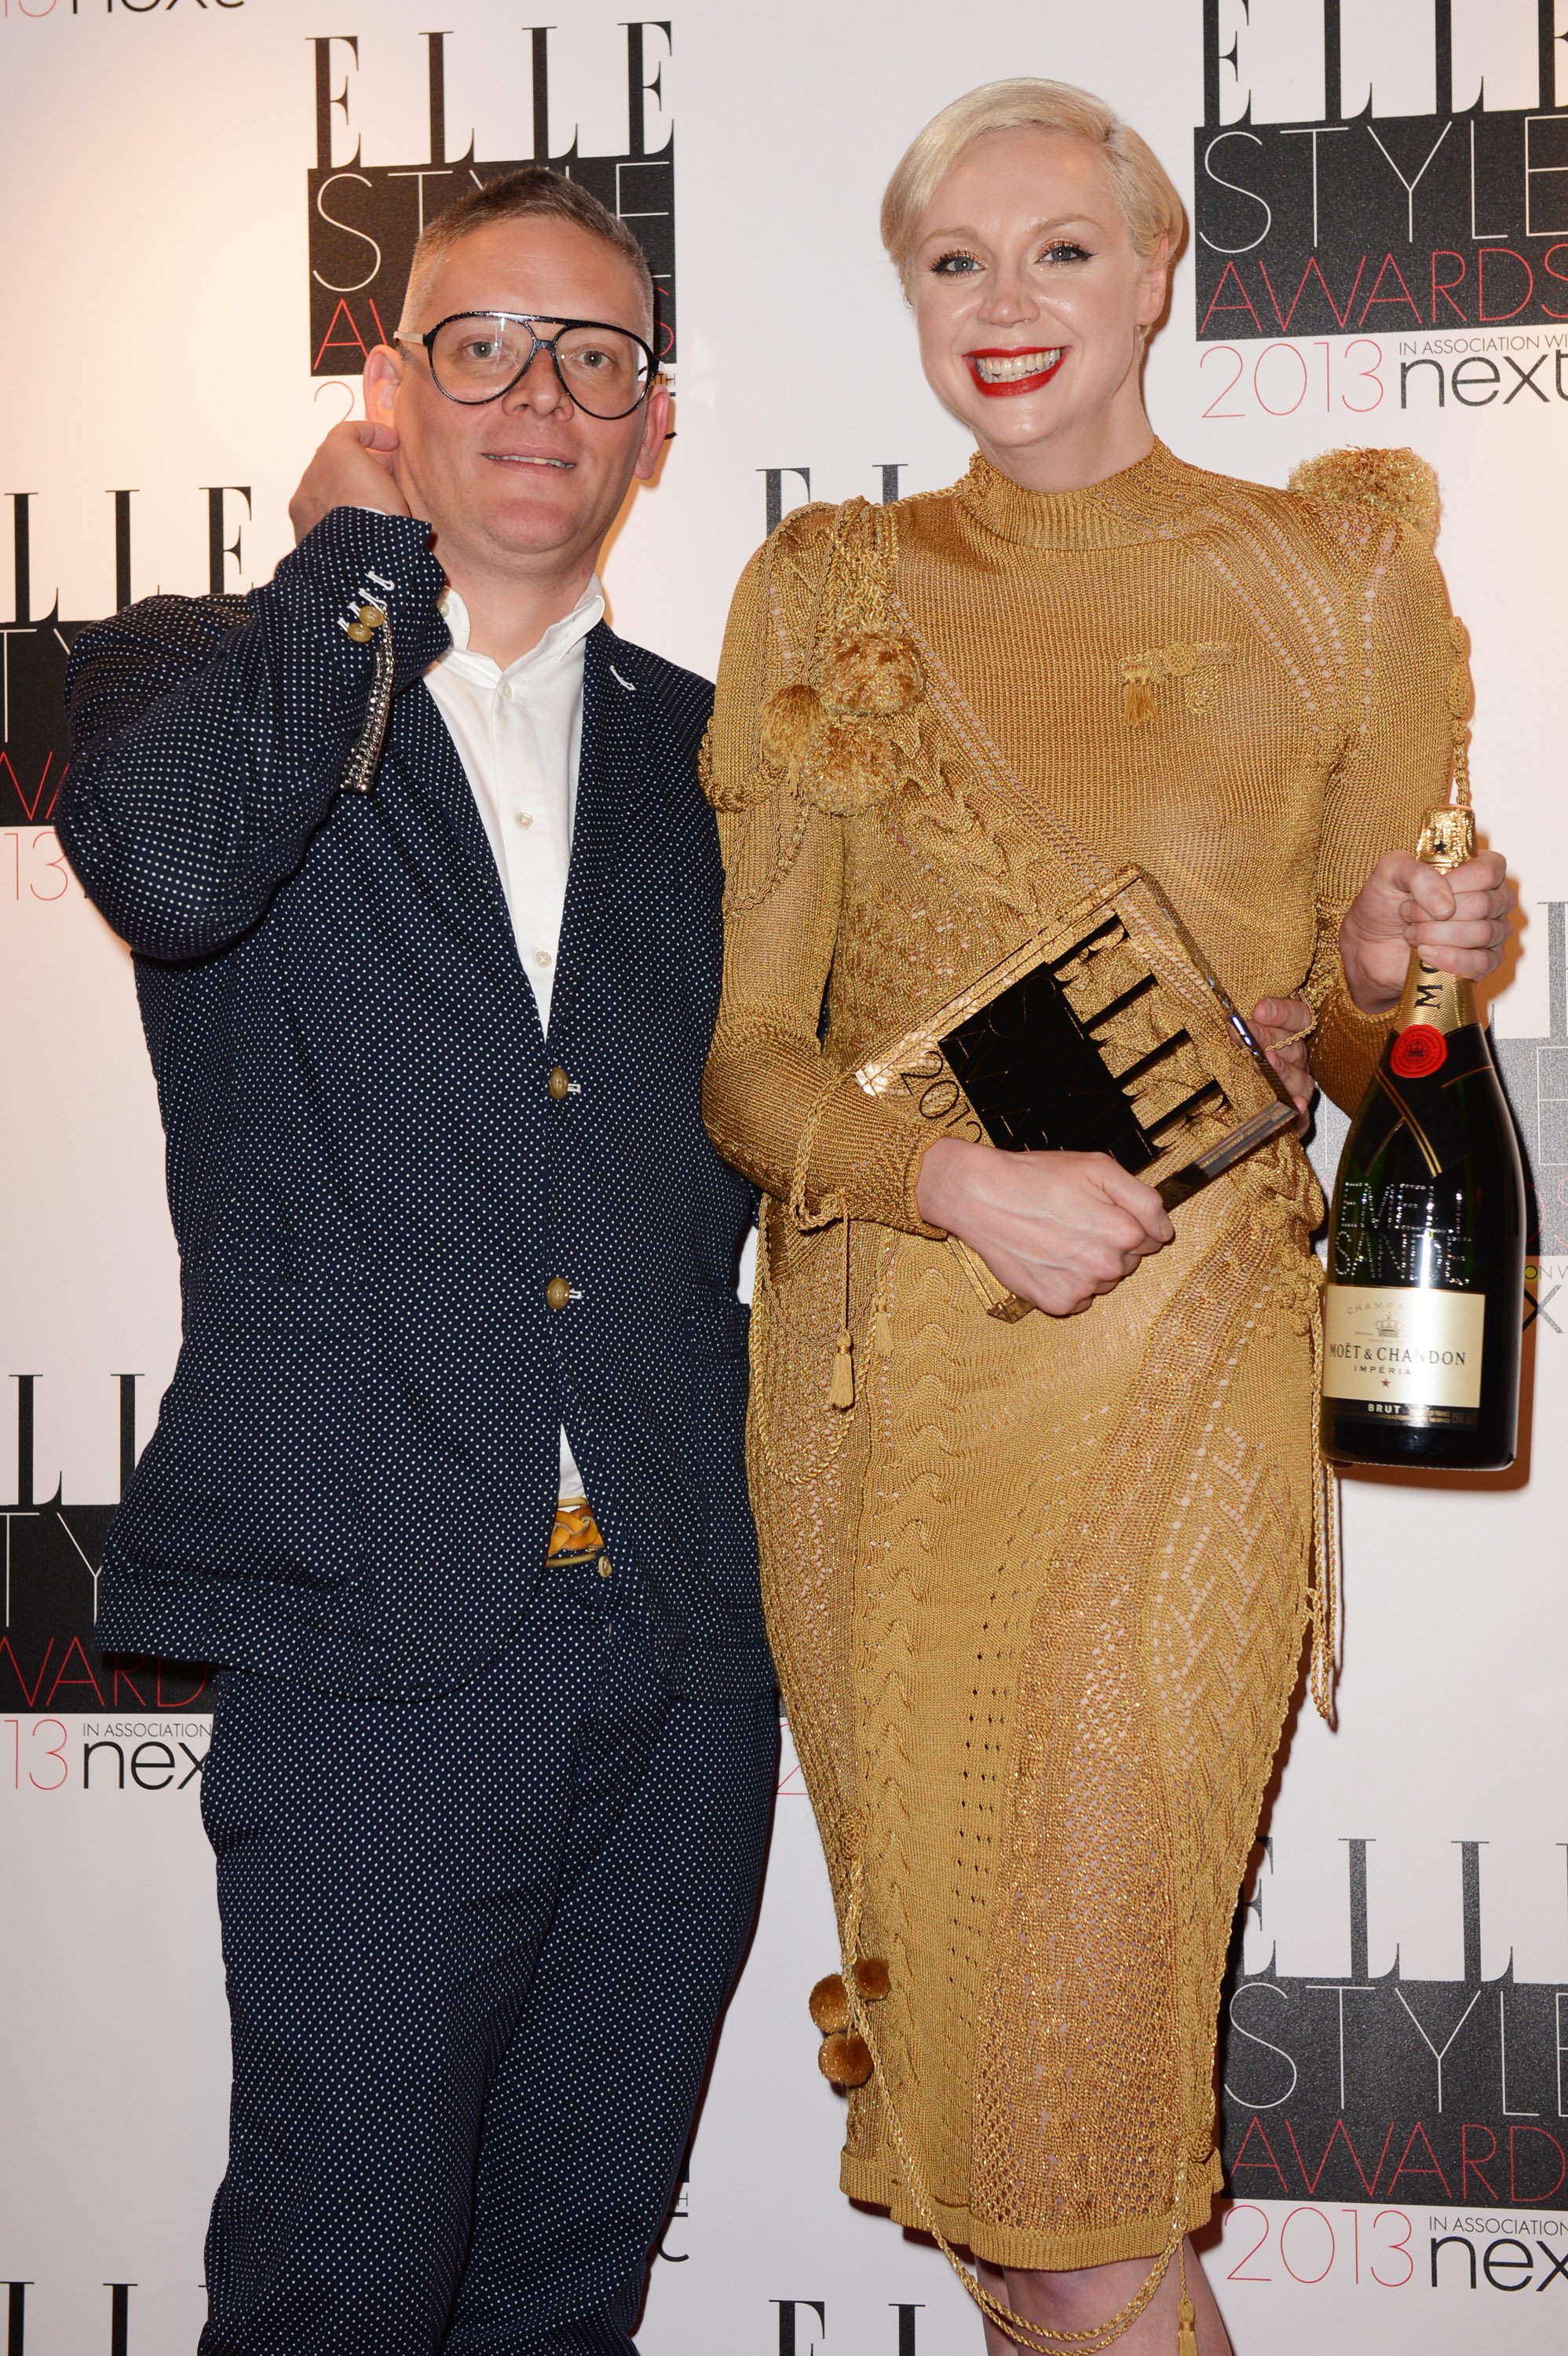 Gwendoline Christie is posing with Giles Deacon after he presented the Best TV Show Award for Game Of Thrones at The Elle Style Awards in London | Source: Getty Images